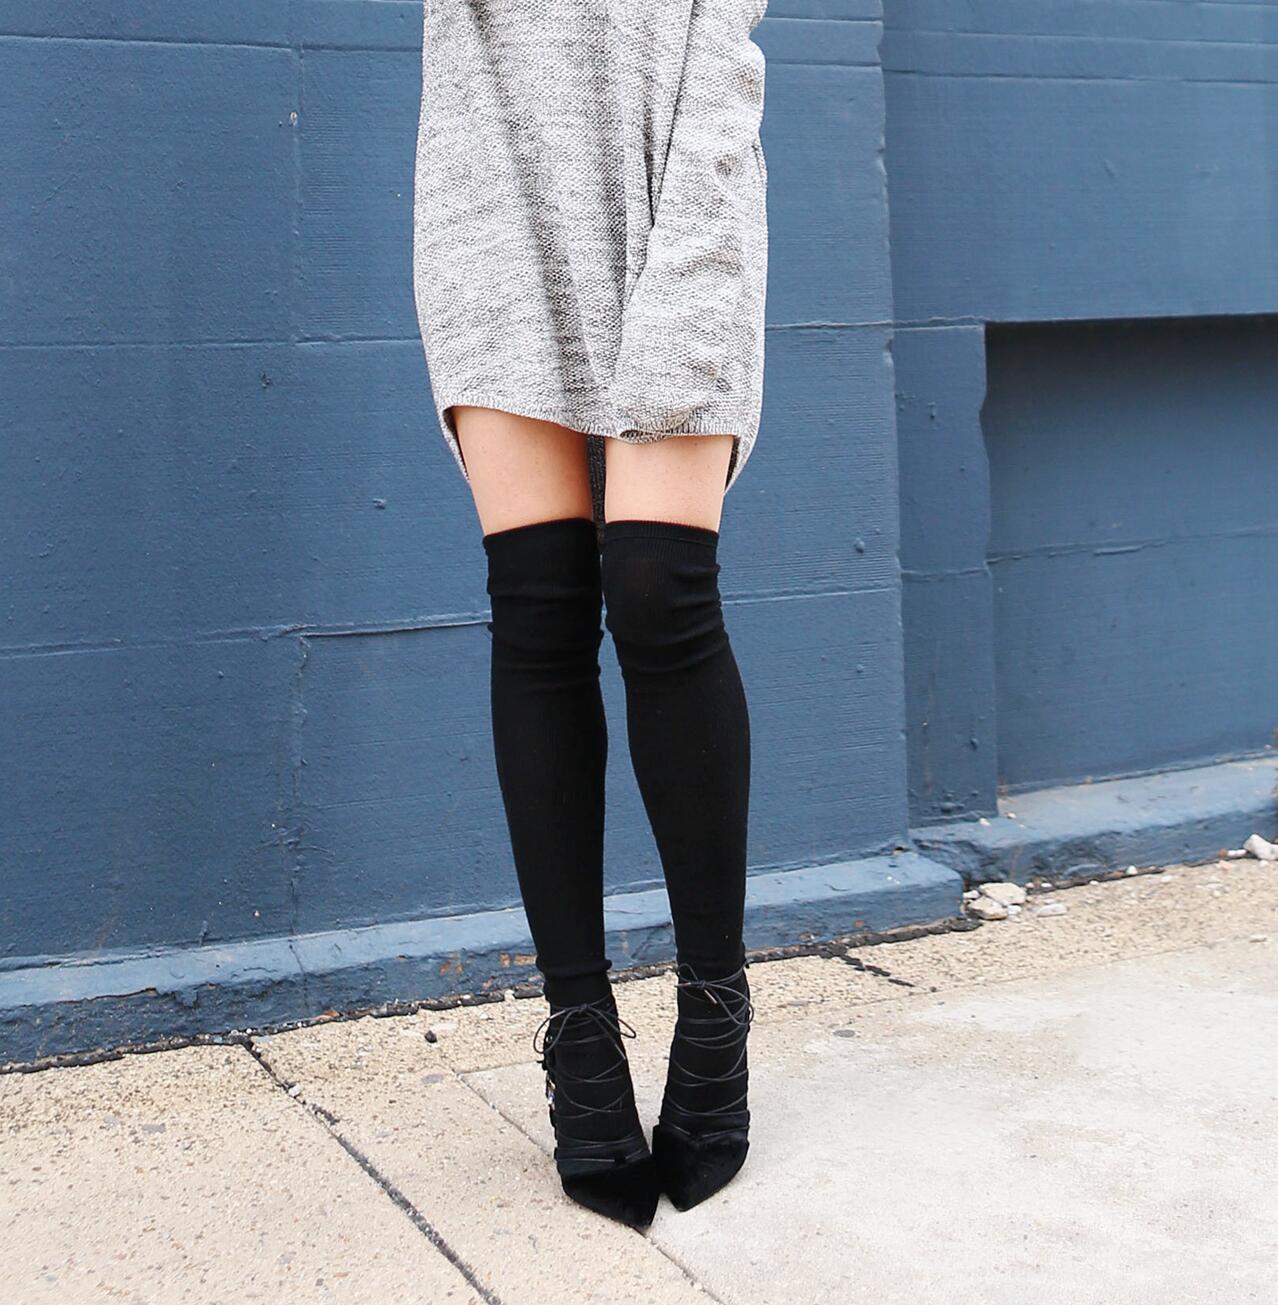 Knee high socks outfits for women – sweater dress